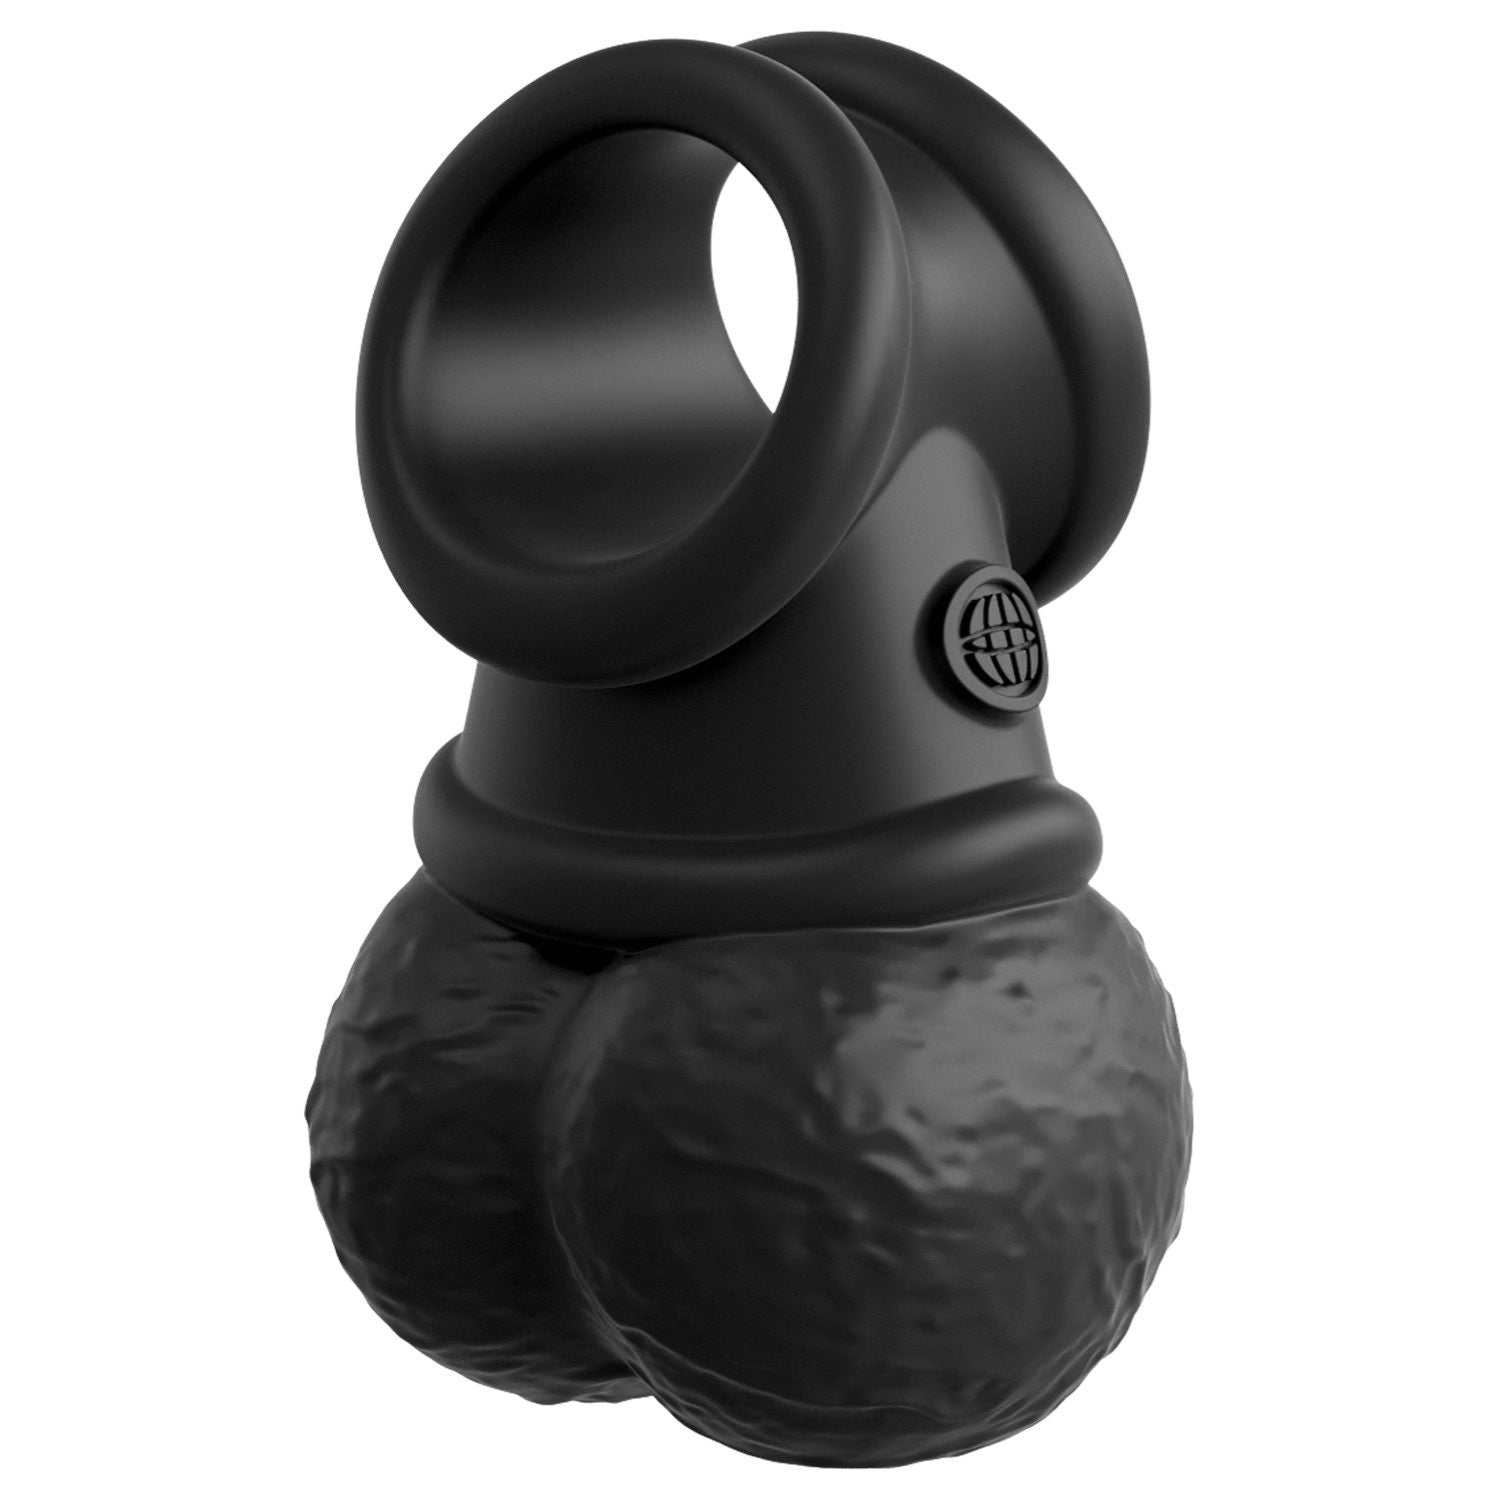 King Cock Elite Ultimate Vibrating Silicone Body Dock Kit - Body Dock Strap-On Harness with 17.8 cm Vibrating Dong &amp; Vibrating Balls by Pipedream